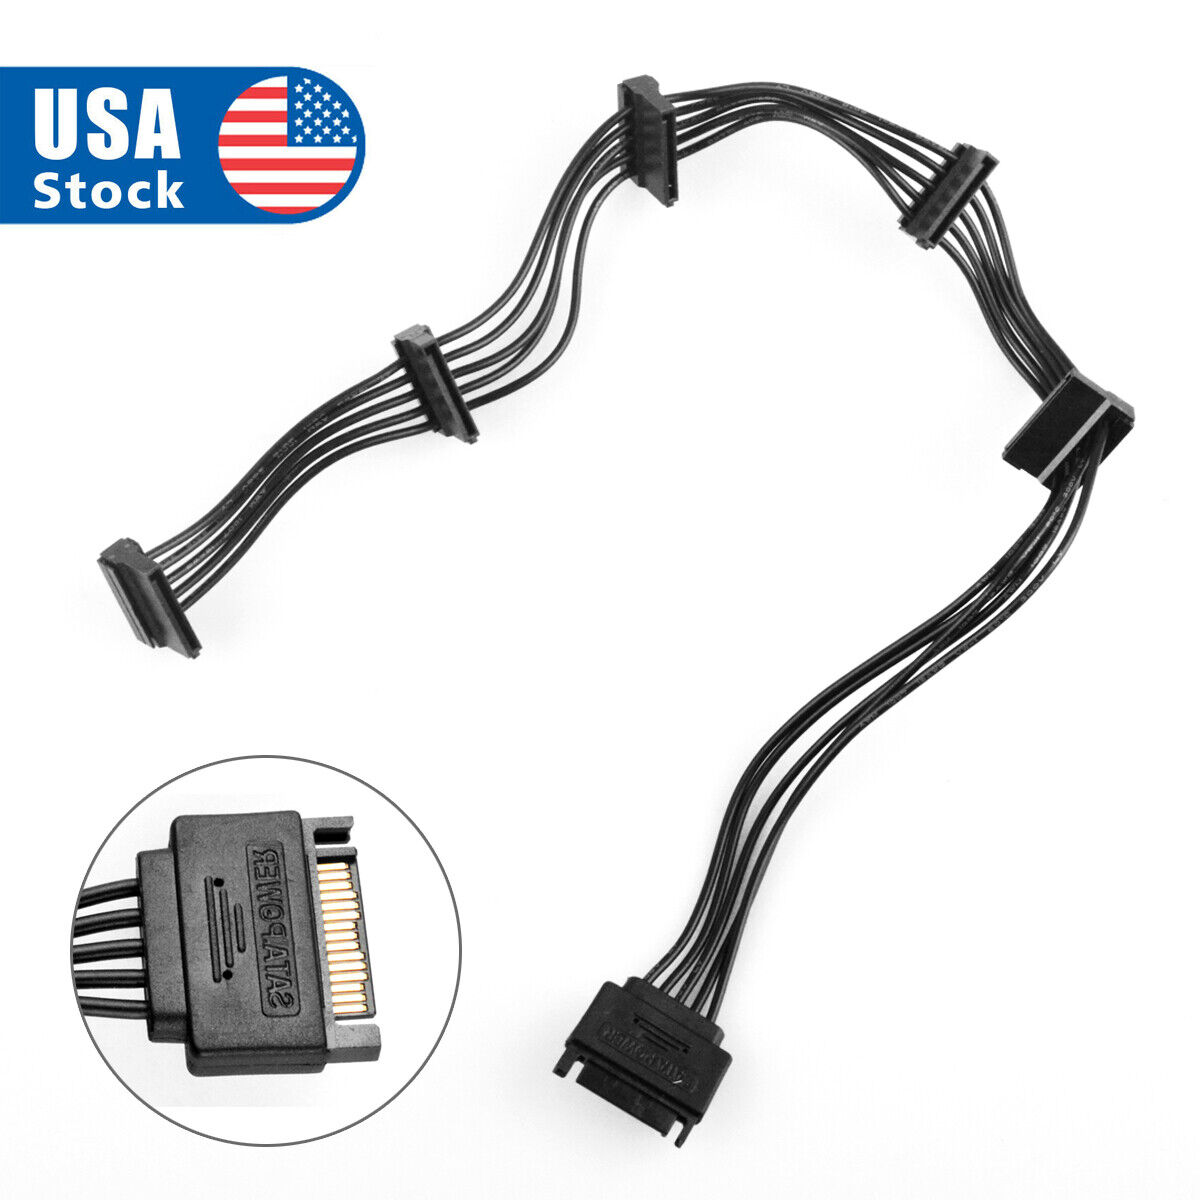 15 Pin SATA Power 1 Male To 5 Female Splitter Hard Drive Cable for HDD SSD USA